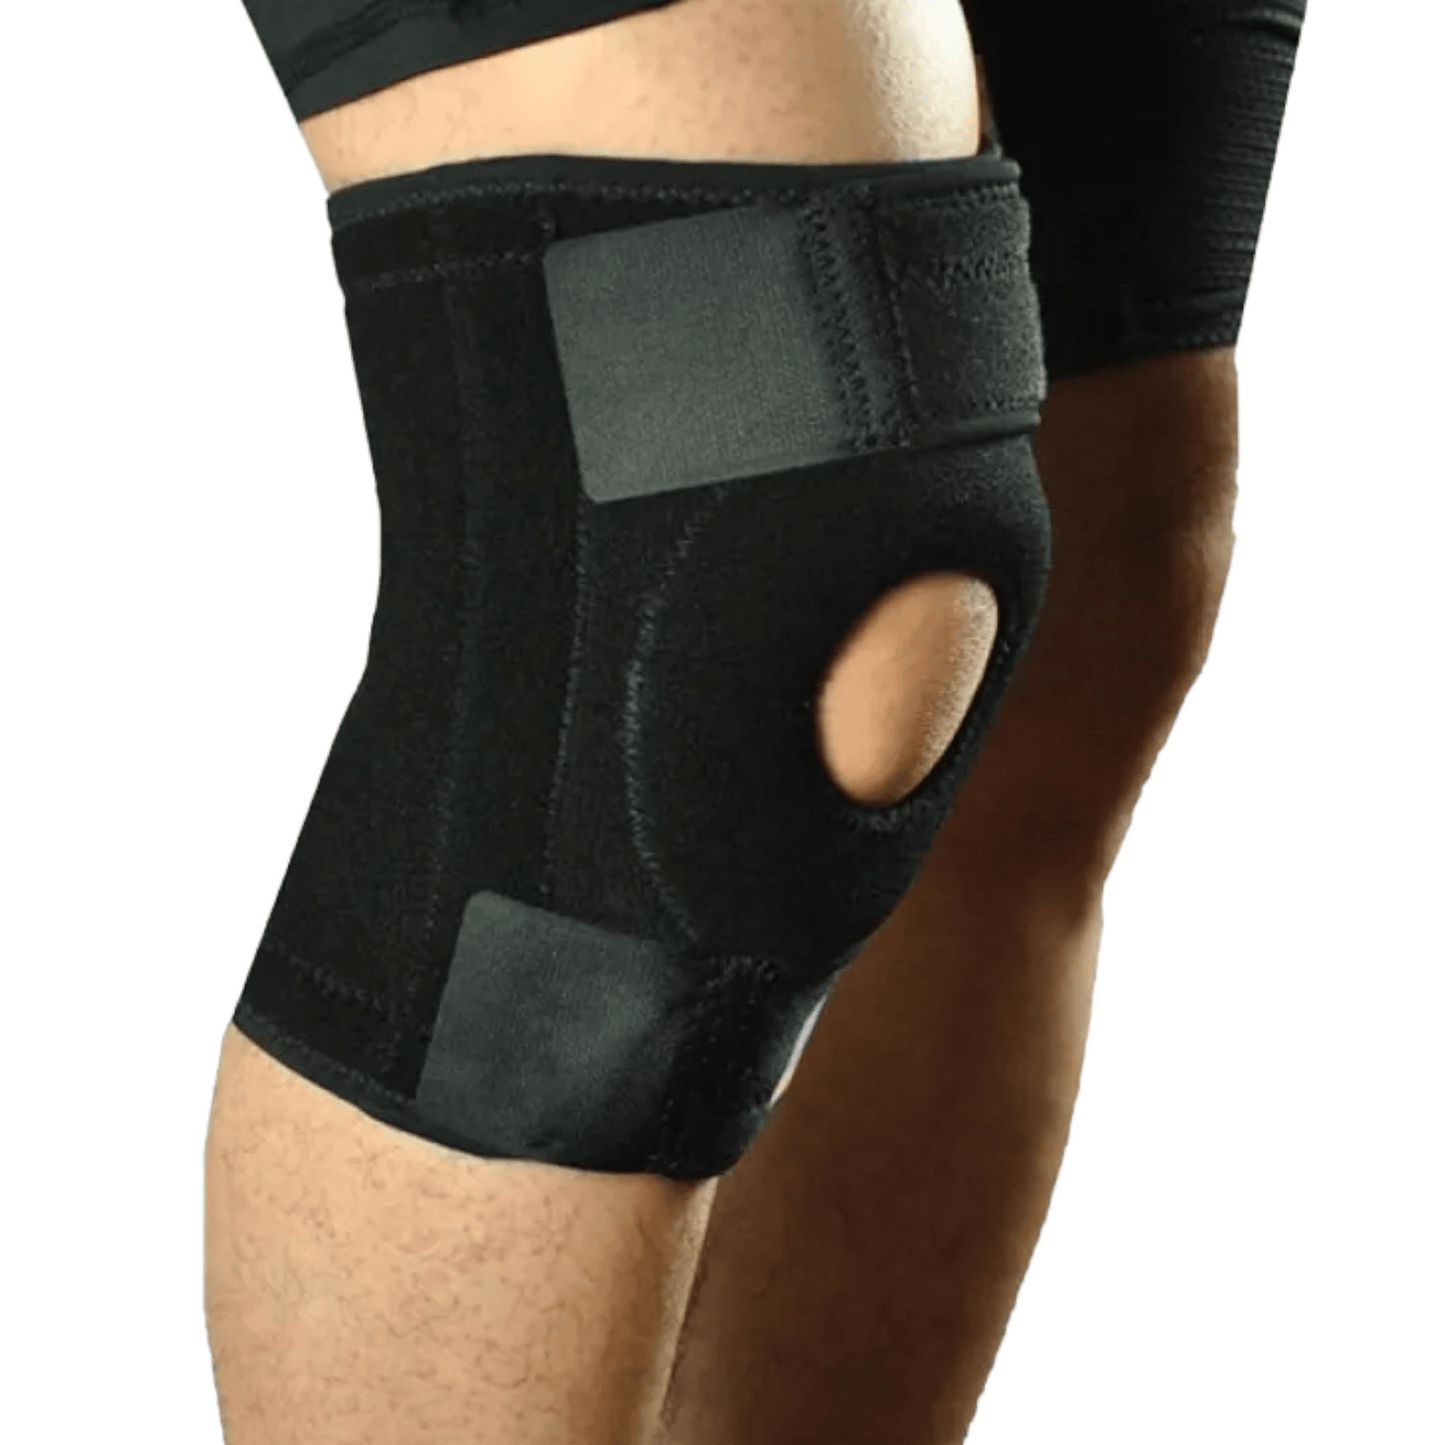 Knee Support Adjustable with Straps - Valetica Sports